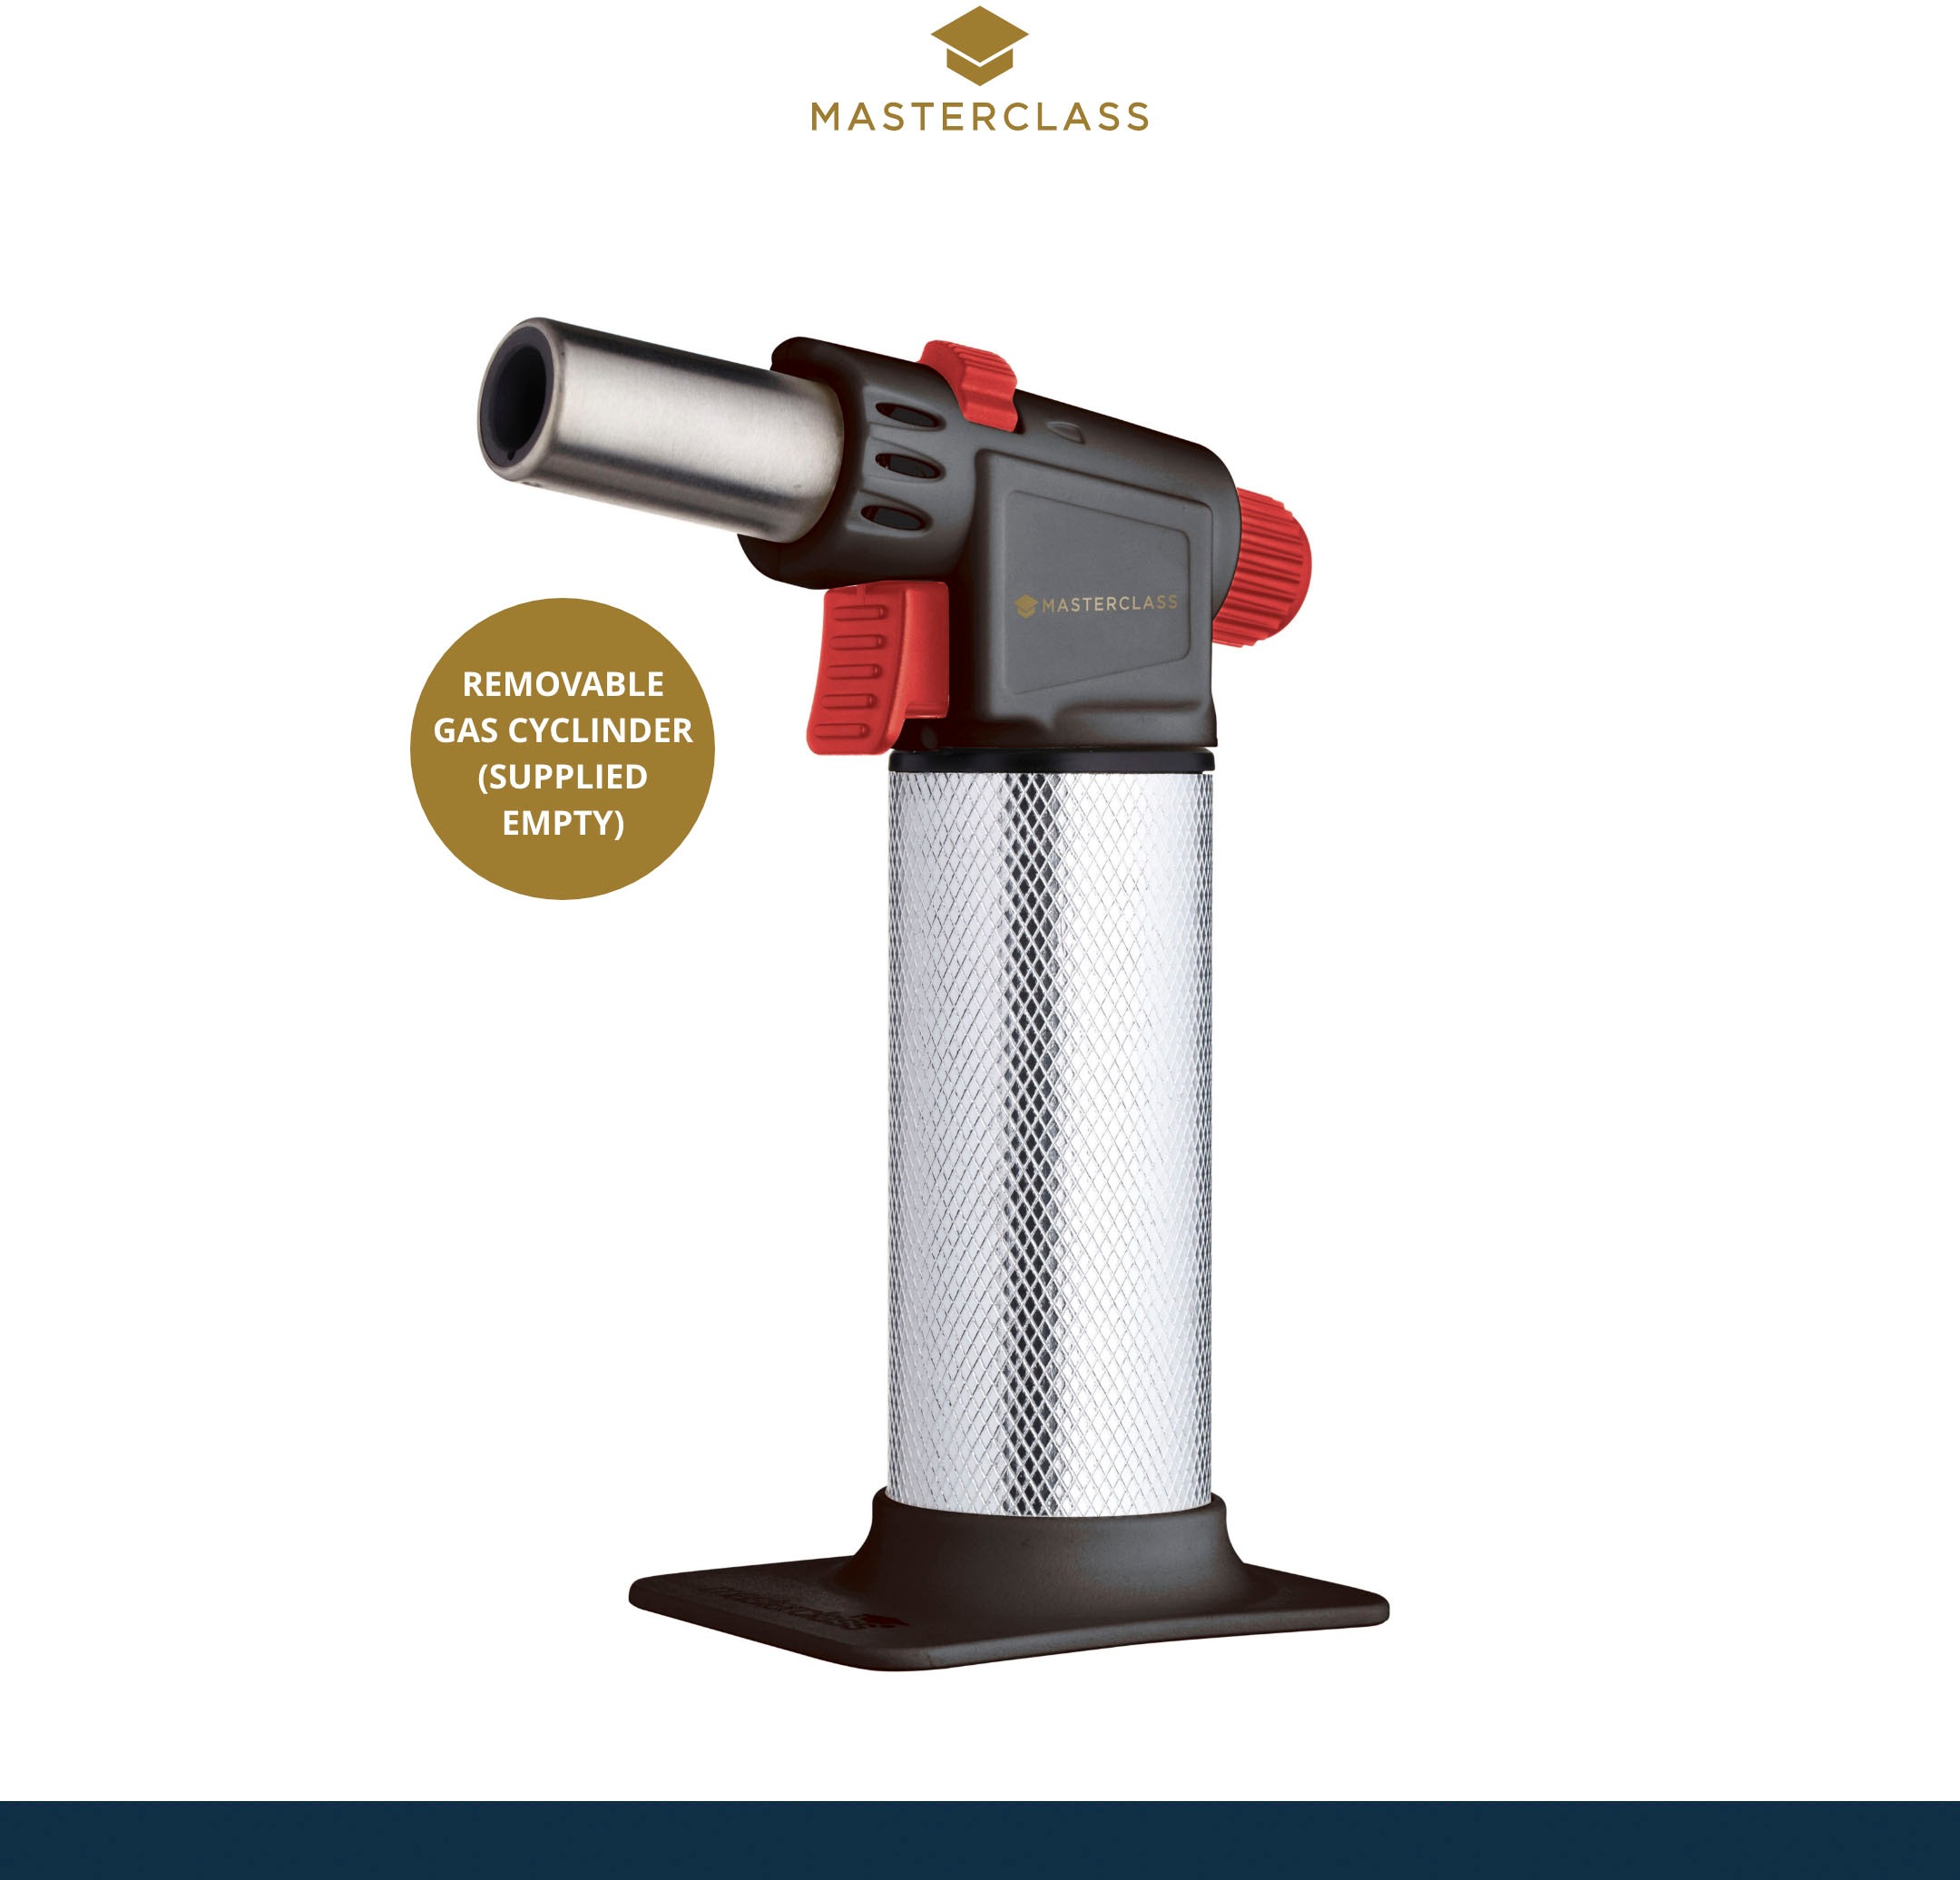 Master Class Flambierbrenner »Professional Cook's Blowtorch«, (1 tlg.)